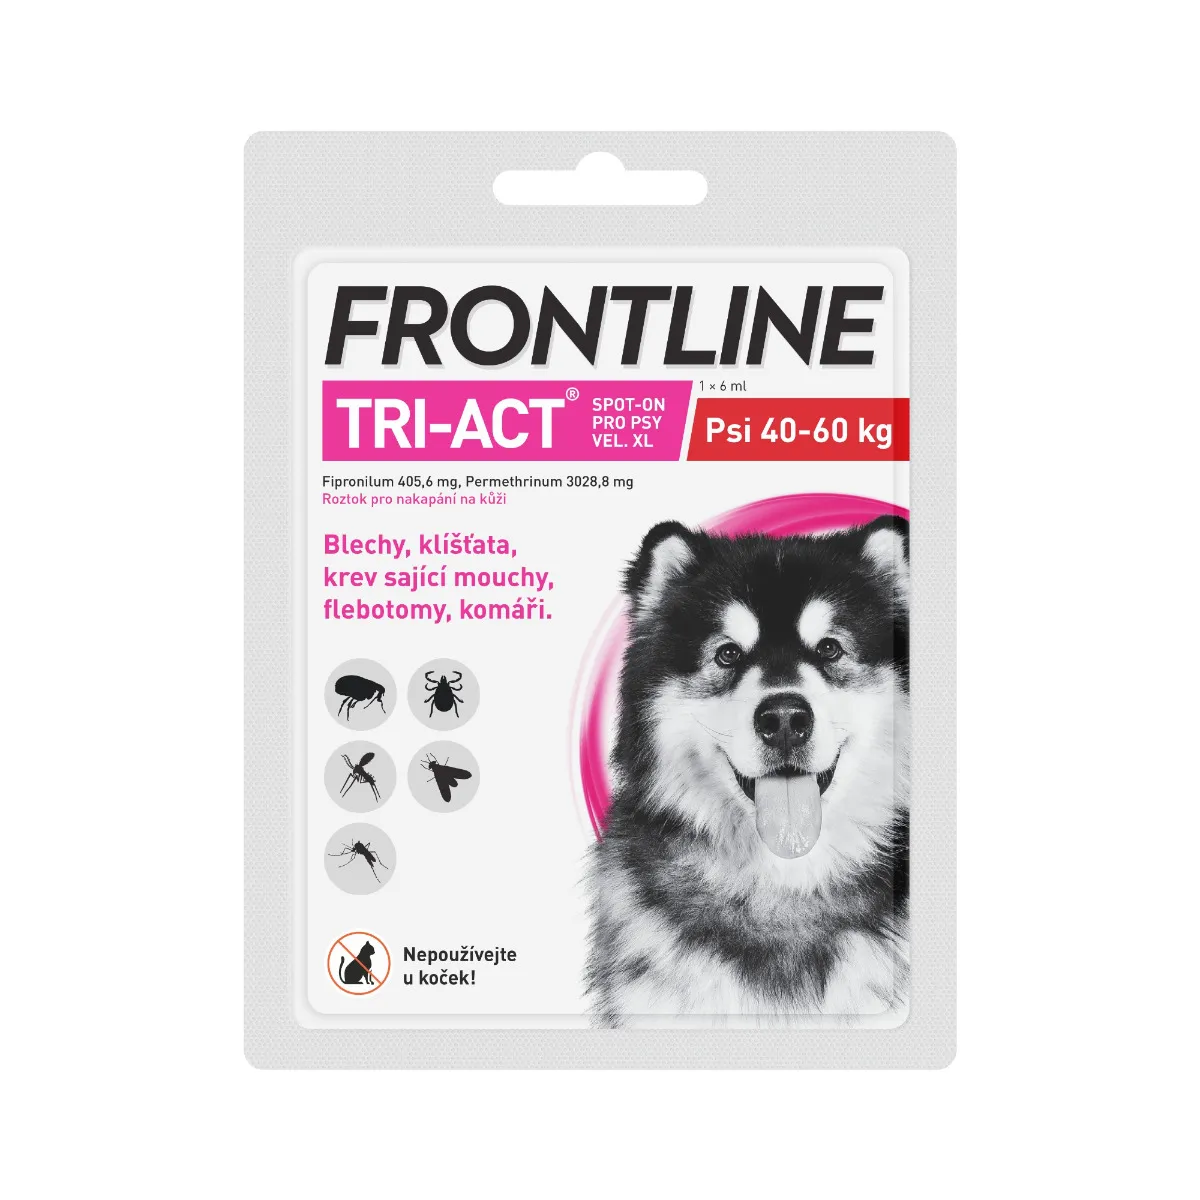 FRONTLINE TRI-ACT pro psy 40-60 kg (XL)